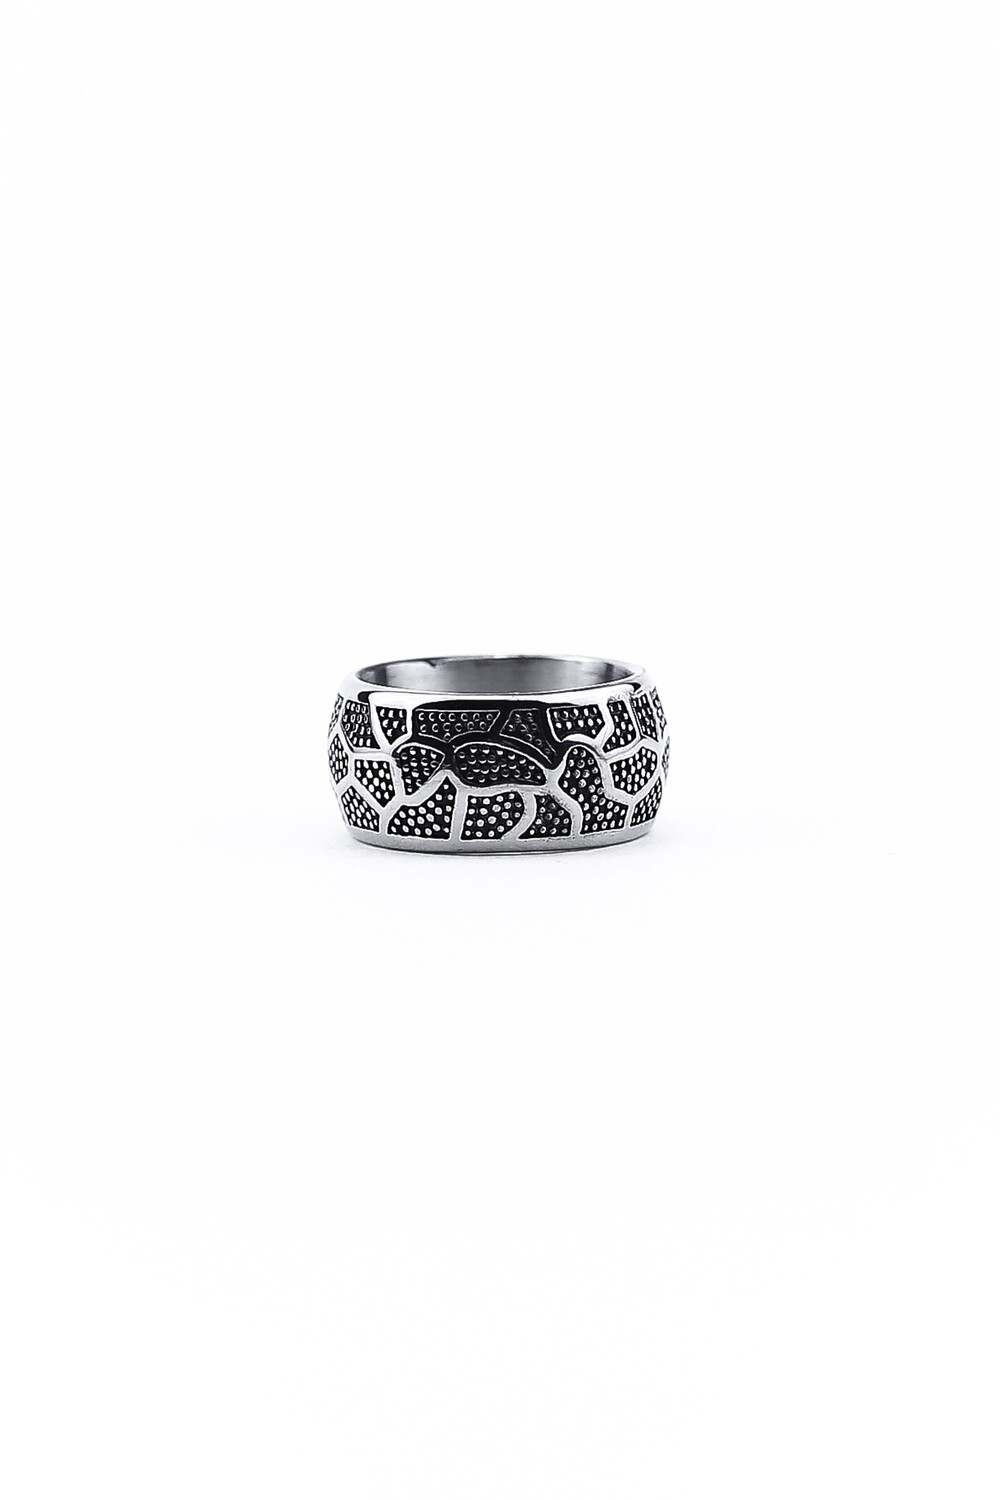 Ring with a textured print